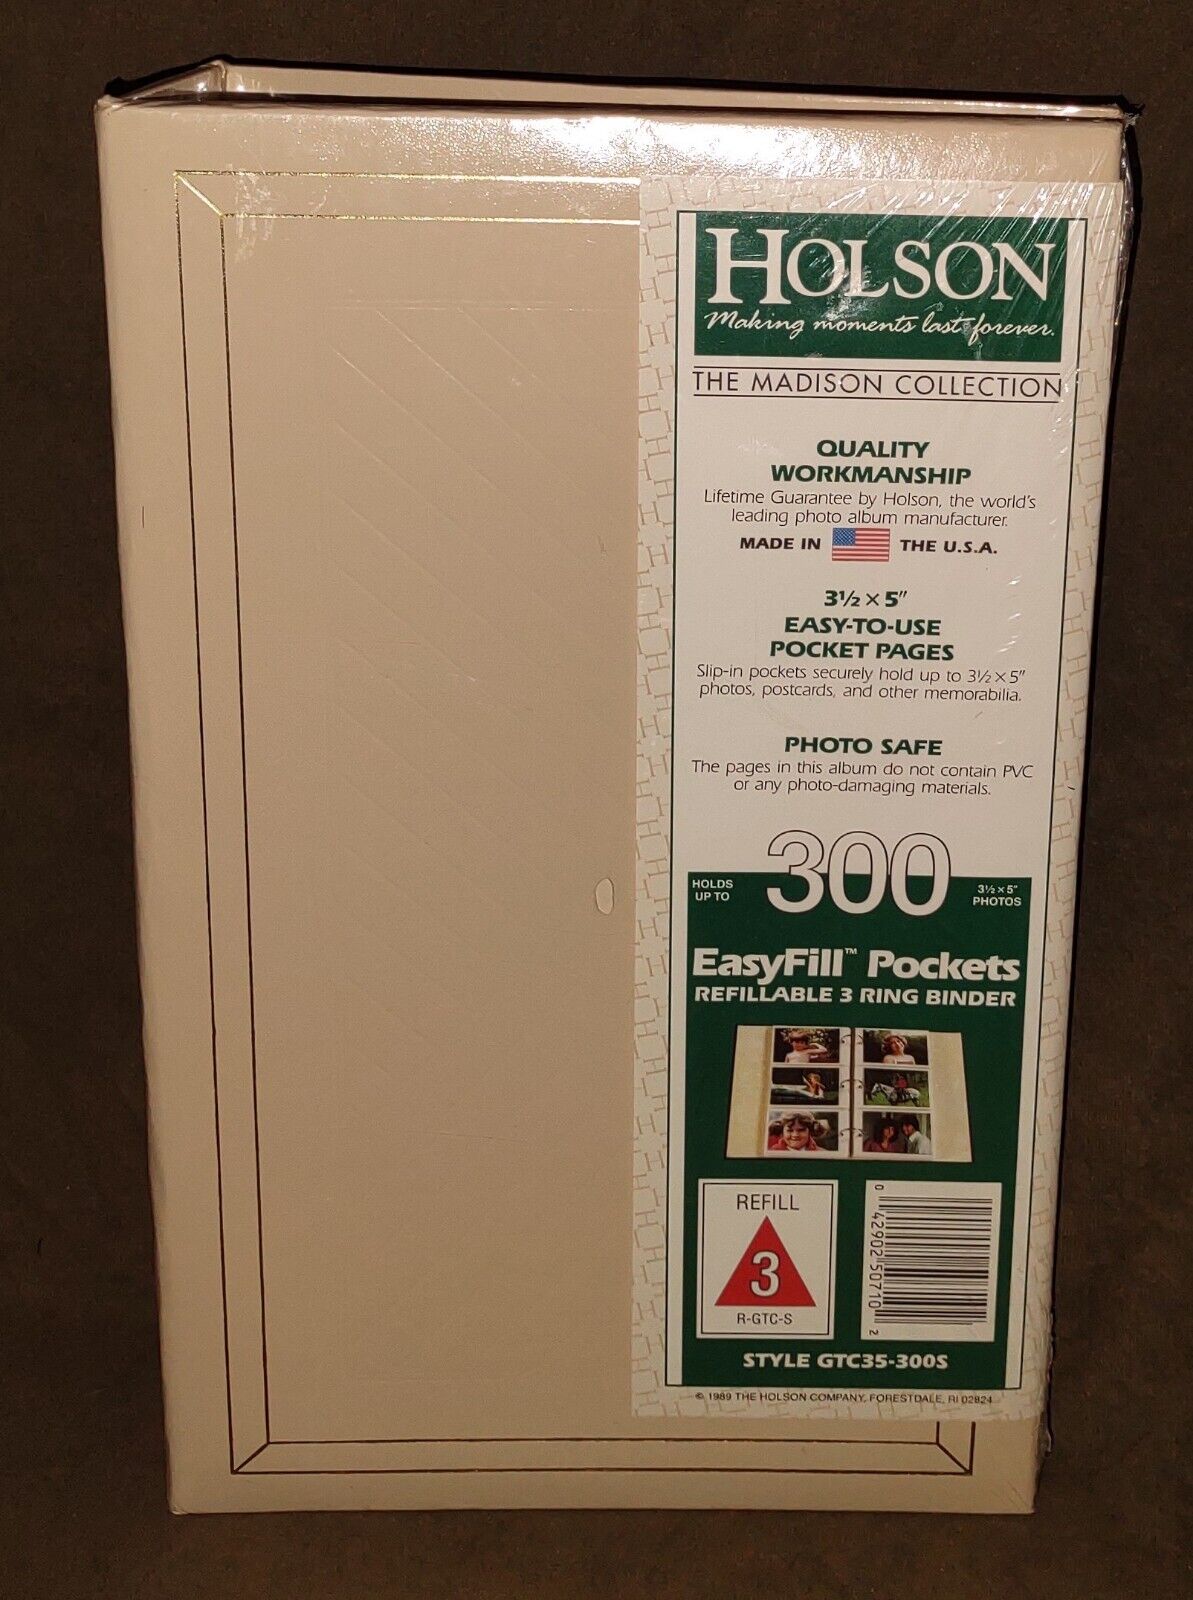 Vintage 1989 Holson Photo Album Holds 300 Pictures Pocket Pages Ring Binder NOS